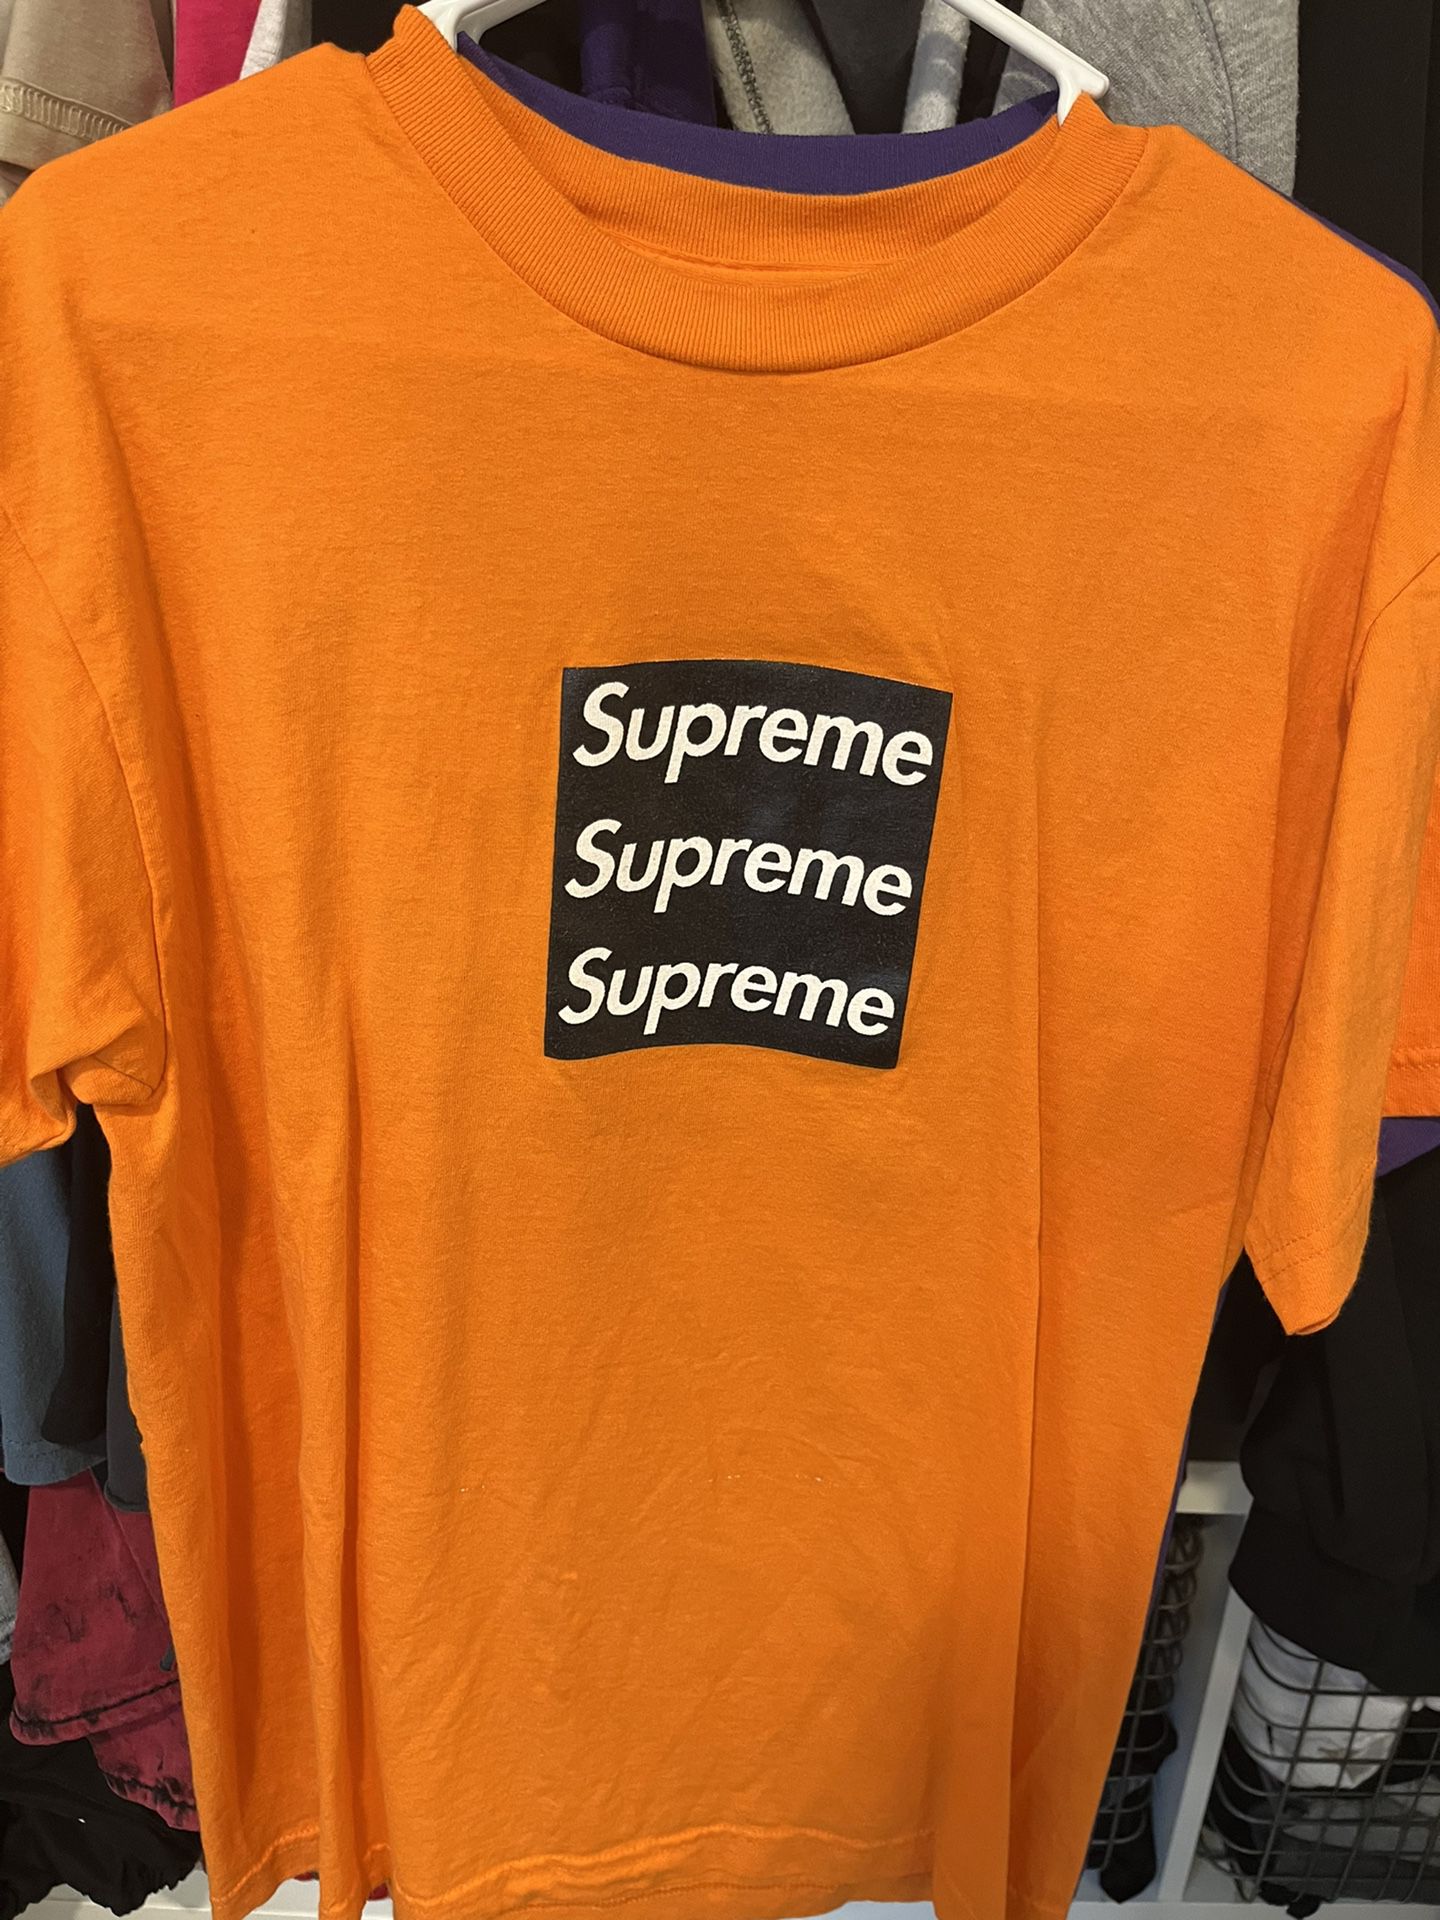 Decided to customize my tonal box logo tees today : r/Supreme